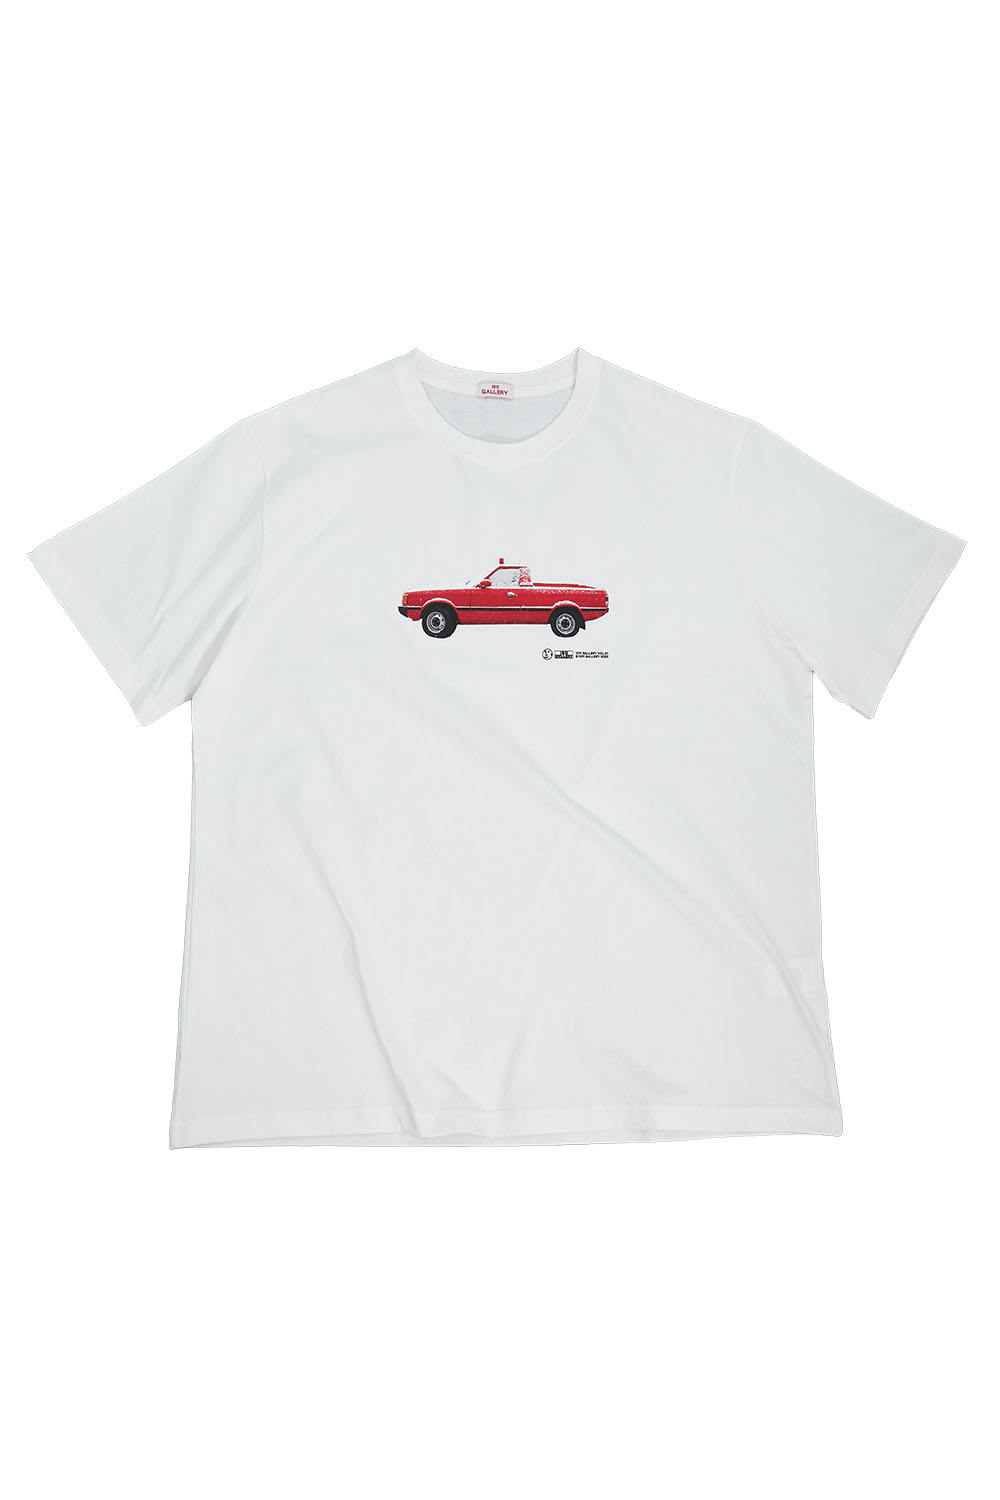 Gallery Red Car T-shirt - White